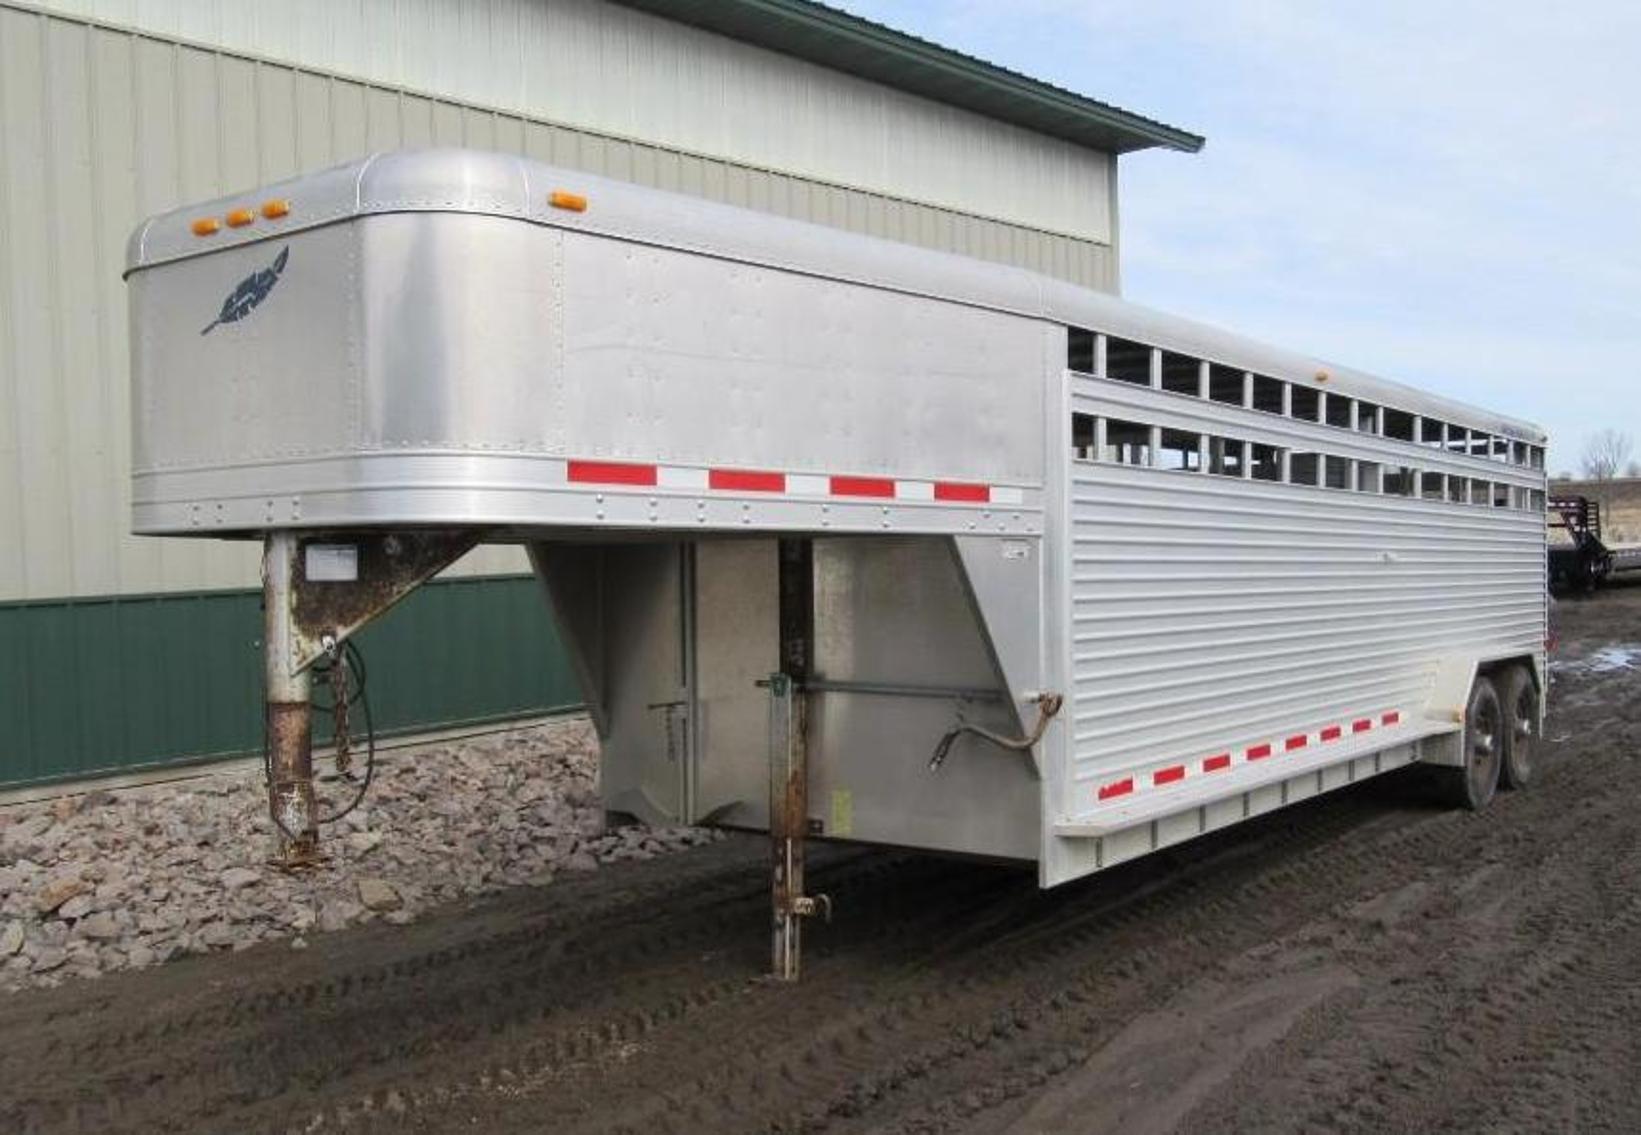 Farm Machinery Retirement/Consignment, Trailers, and More